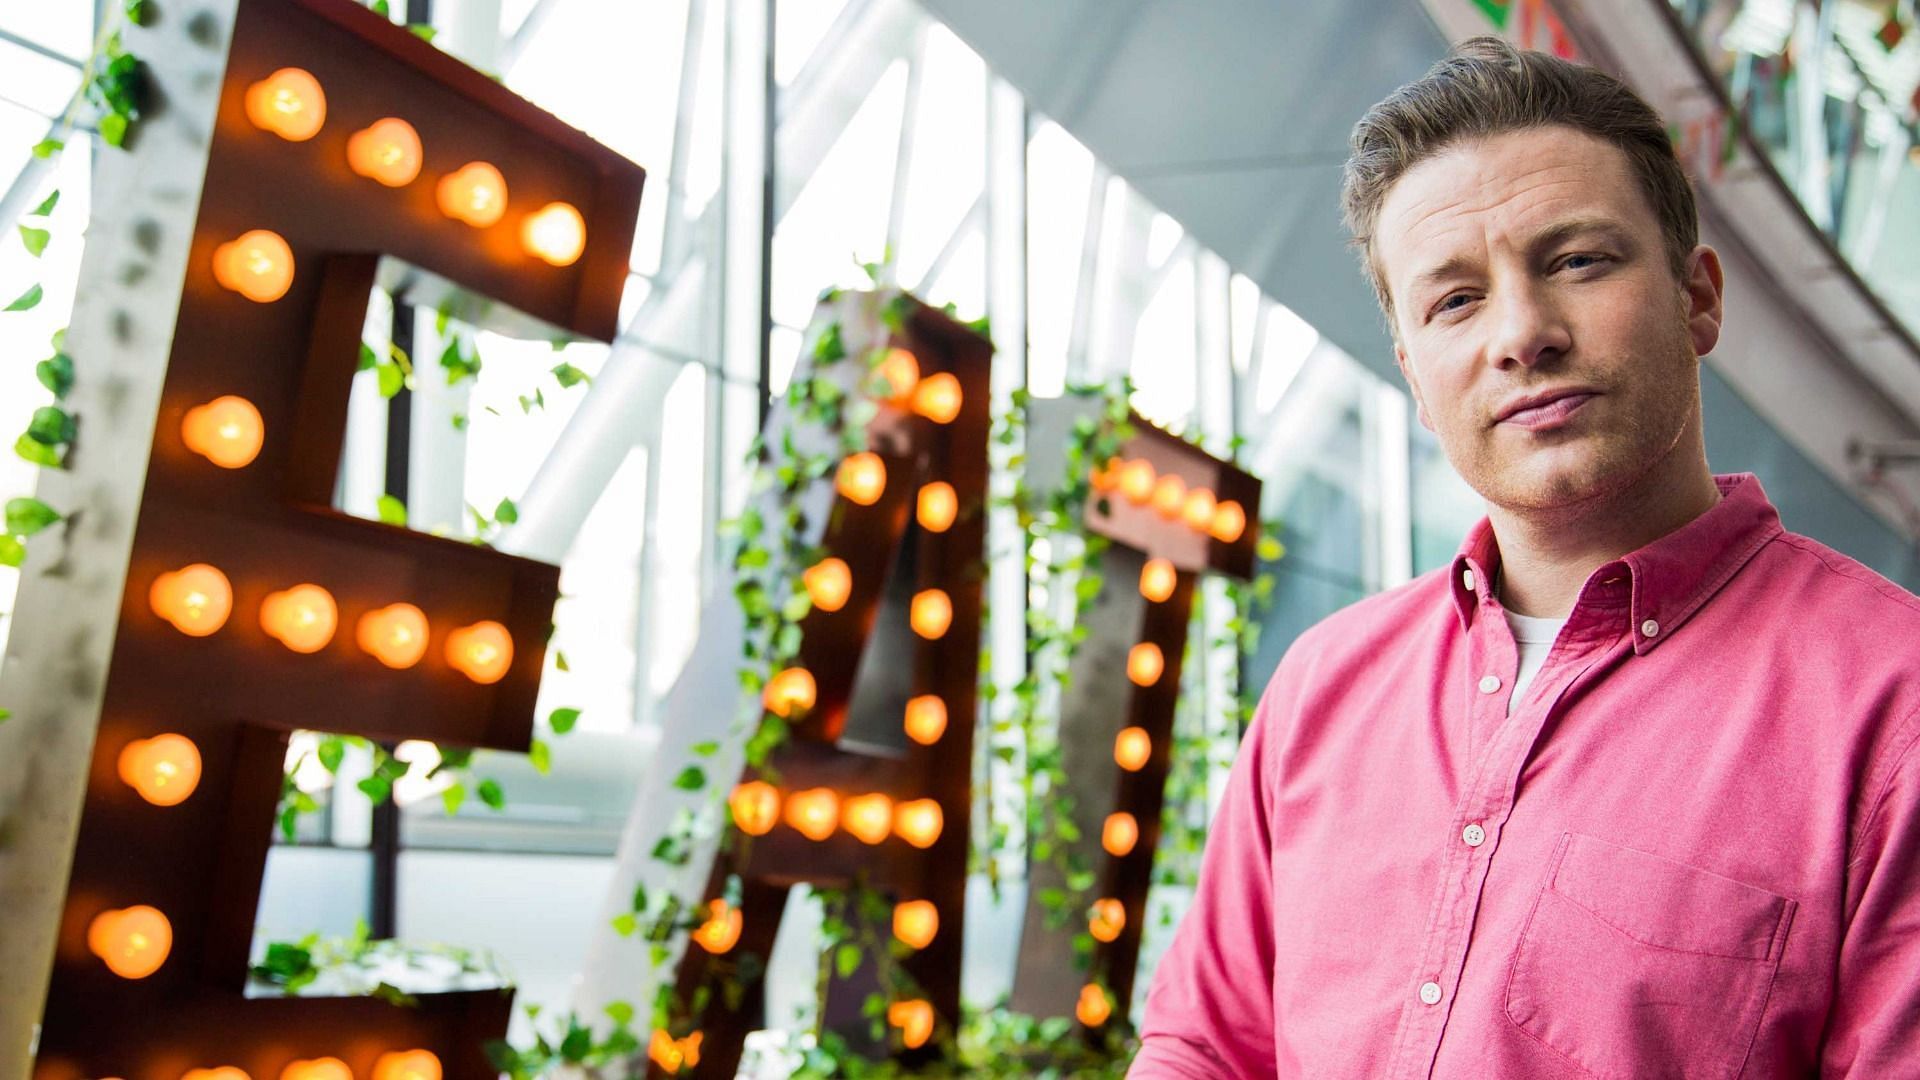 Jamie Oliver has received severe backlash in the past for cultural appropriation (Image via Tristan Fewings/Getty Images)